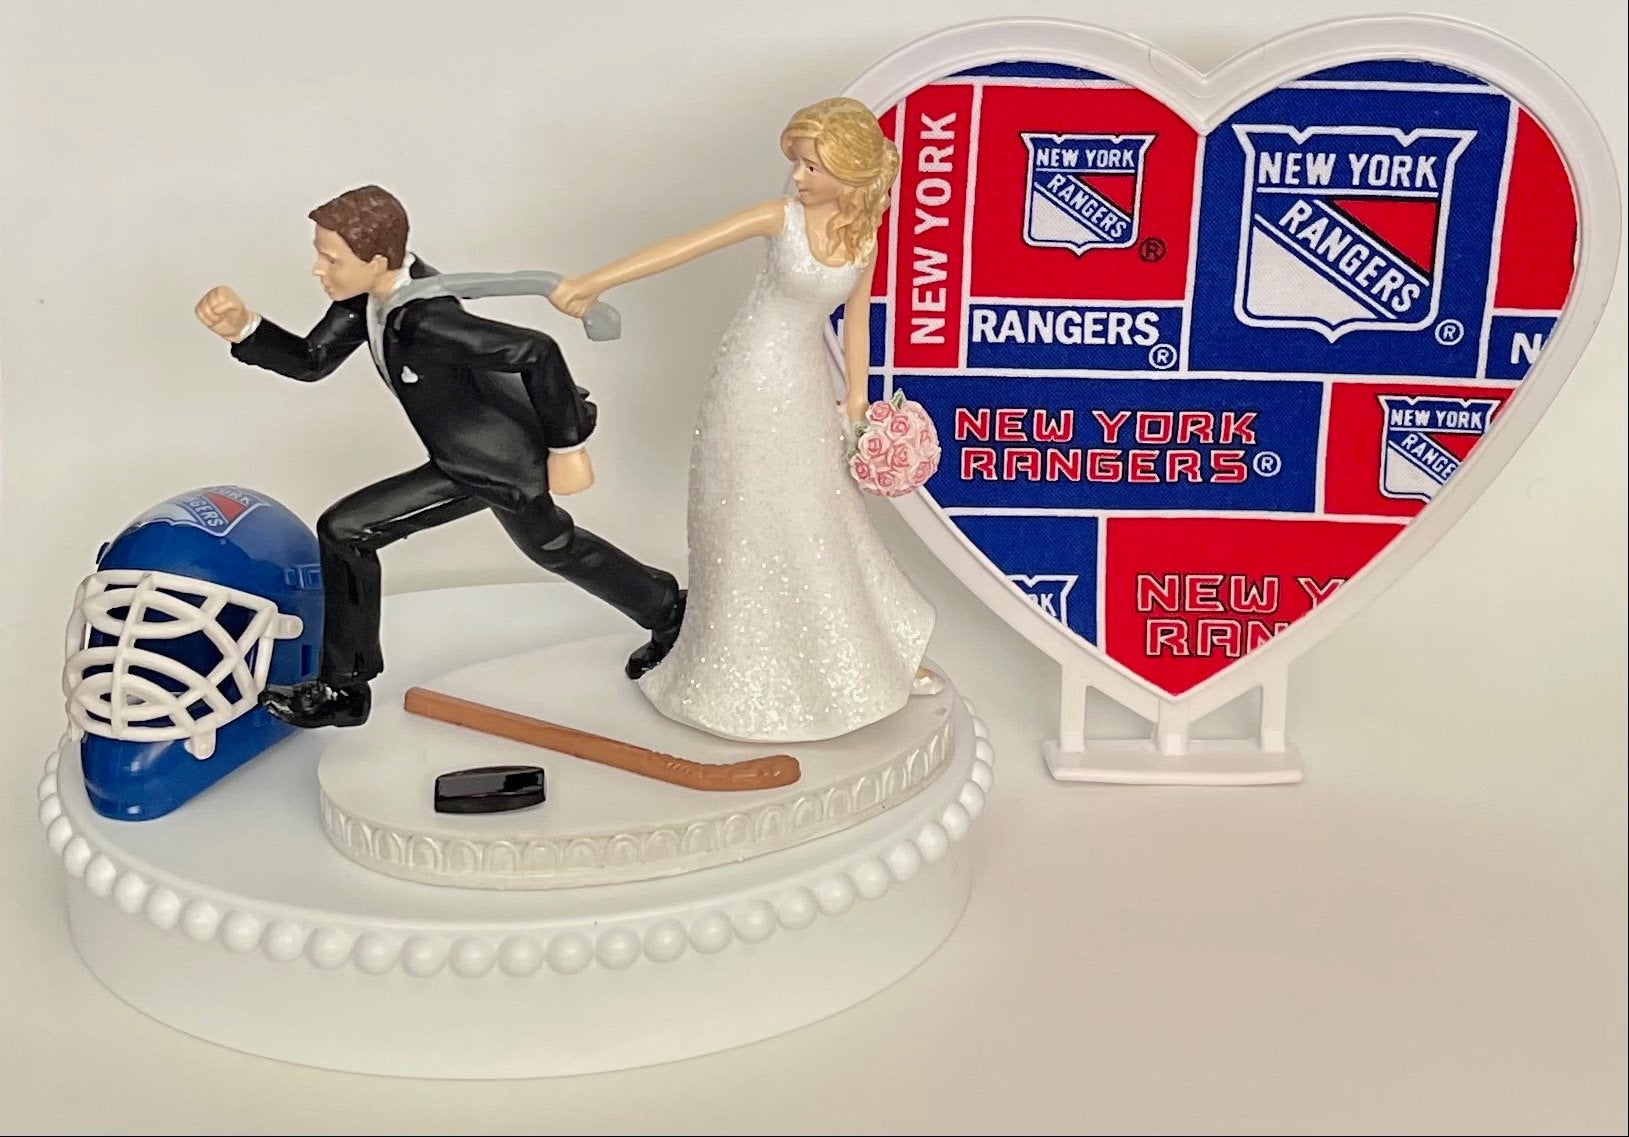 Wedding Cake Topper New York Rangers Hockey Themed Running Funny Humorous Bride Groom Unique NY Sports Fans Reception Fun Groom's Cake Top